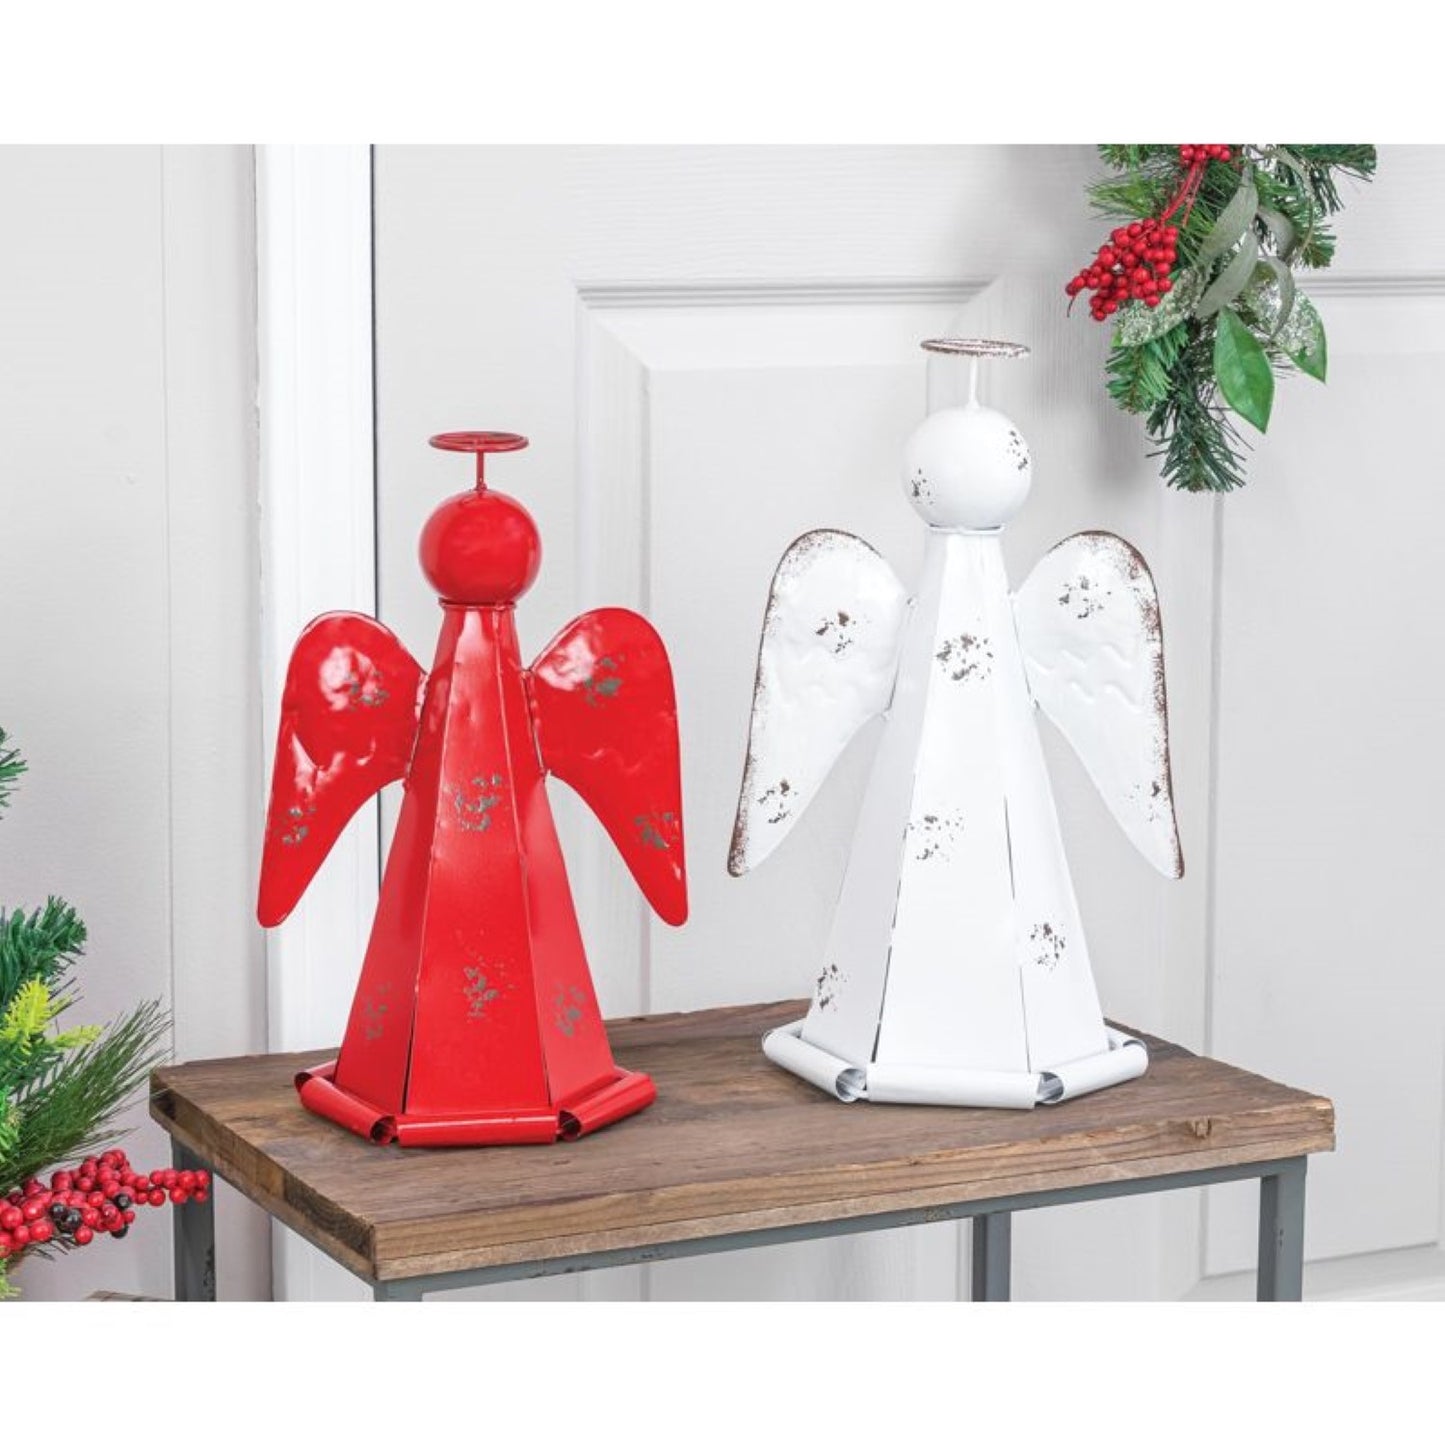 Hanna's Handiworks Red And White Distressed Metal Angel 2 Piece Set